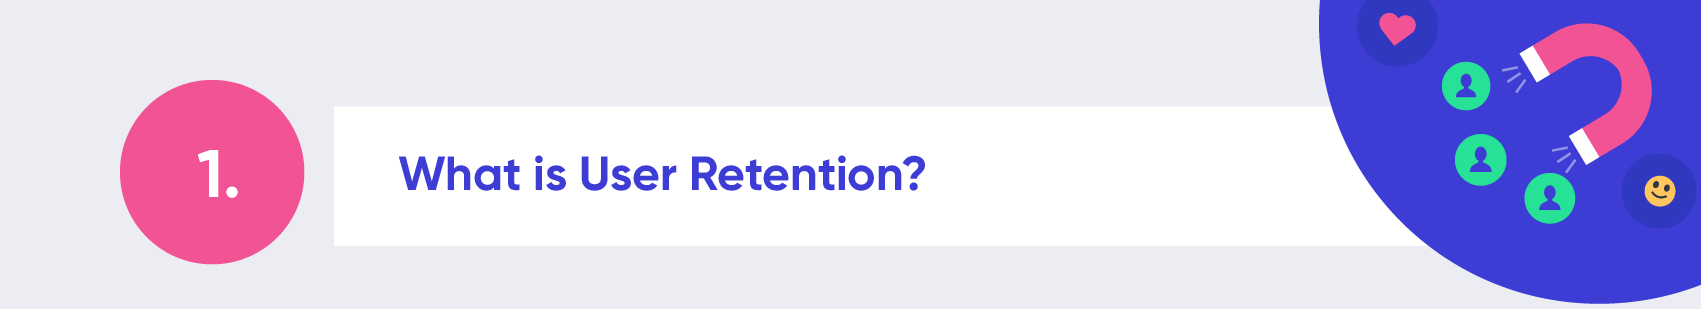 What is User Retention?